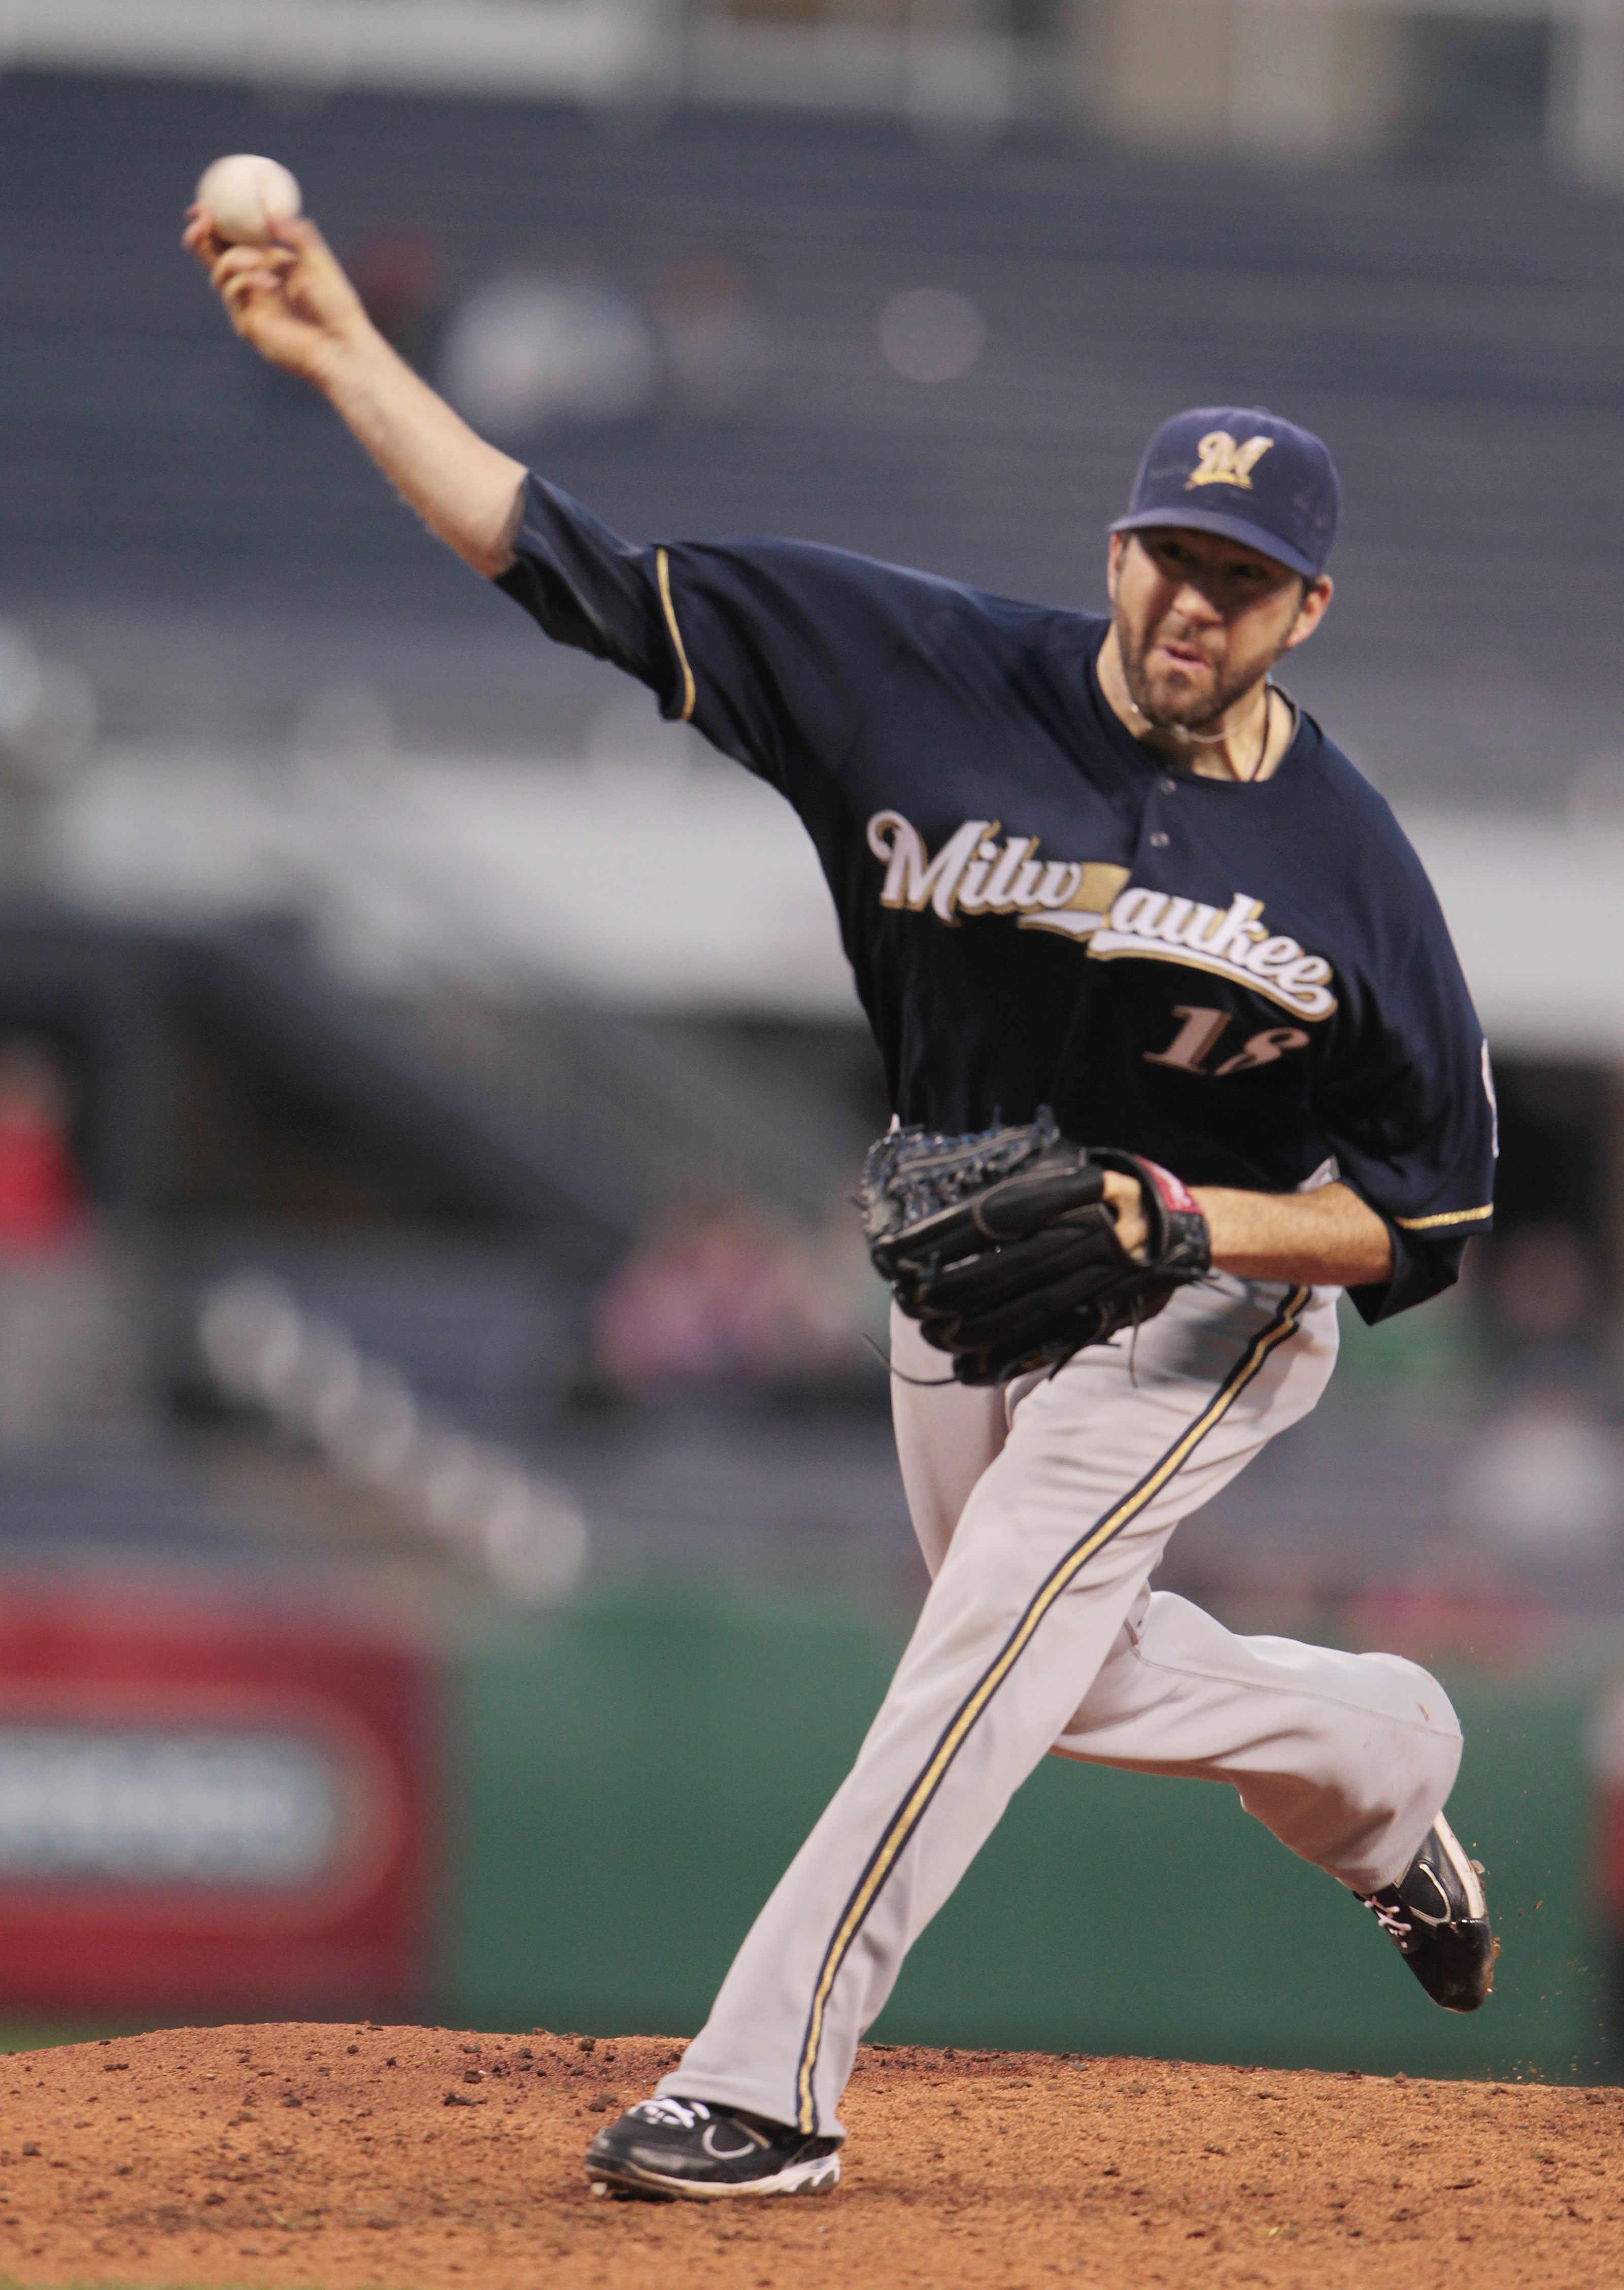 PITTSBURGH, PA - APRIL 13:  Shaun Marcum #18 of the Milwaukee Brewers throws a pitch during their game against the Pittsburgh Pirates at PNC Park on April 13, 2011 in Pittsburgh, Pennsylvania.  (Photo by Scott Halleran/Getty Images)